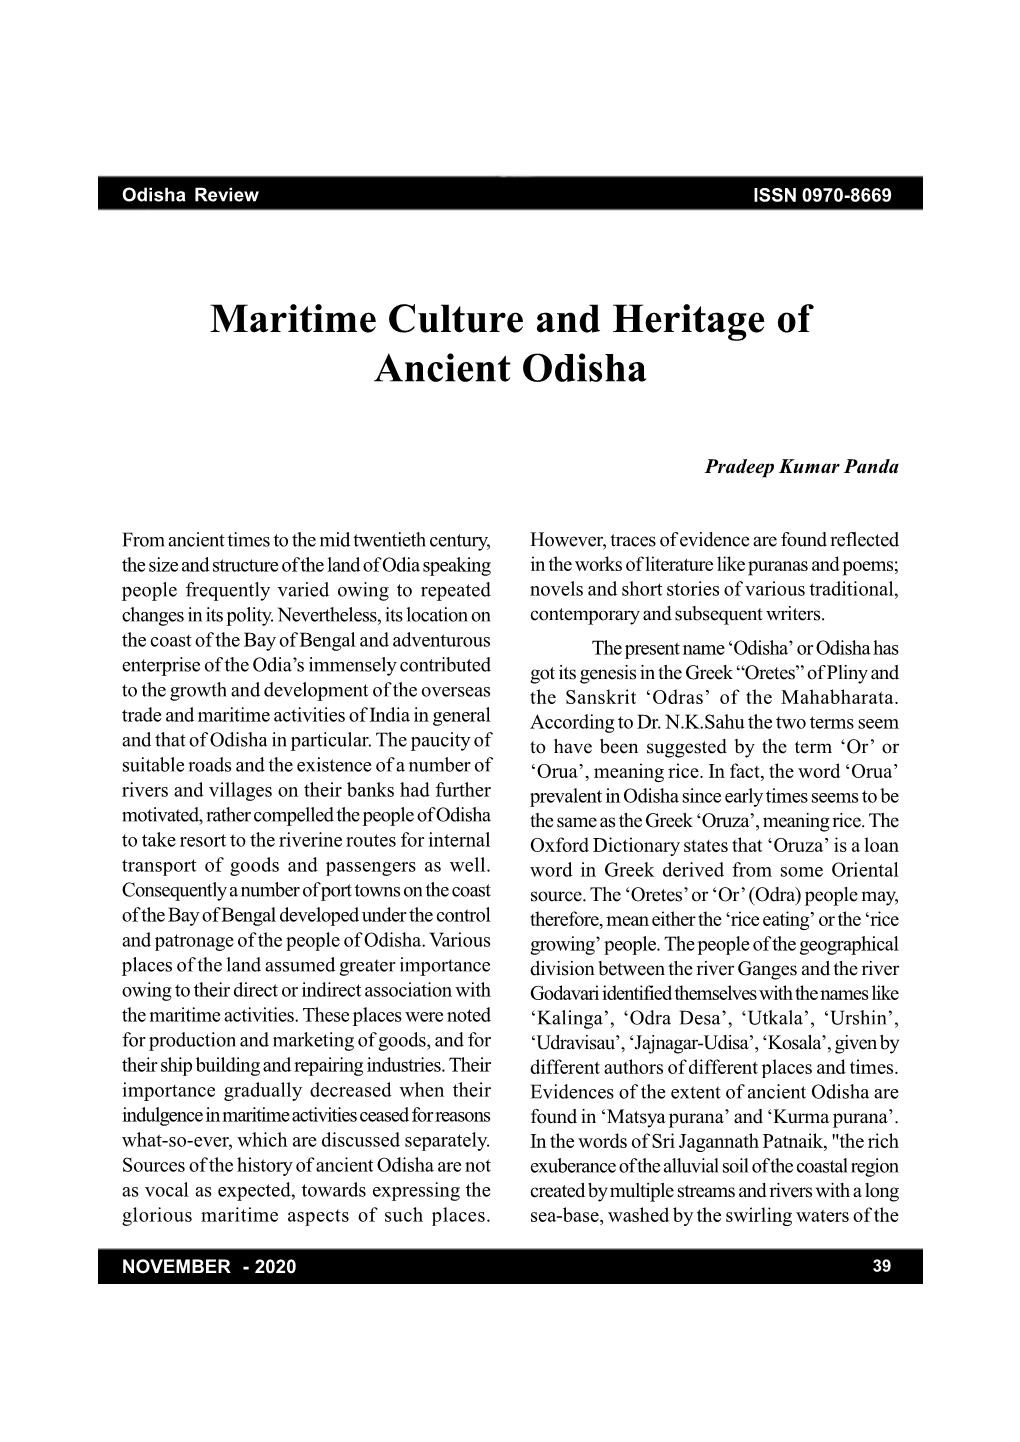 Maritime Culture and Heritage of Ancient Odisha